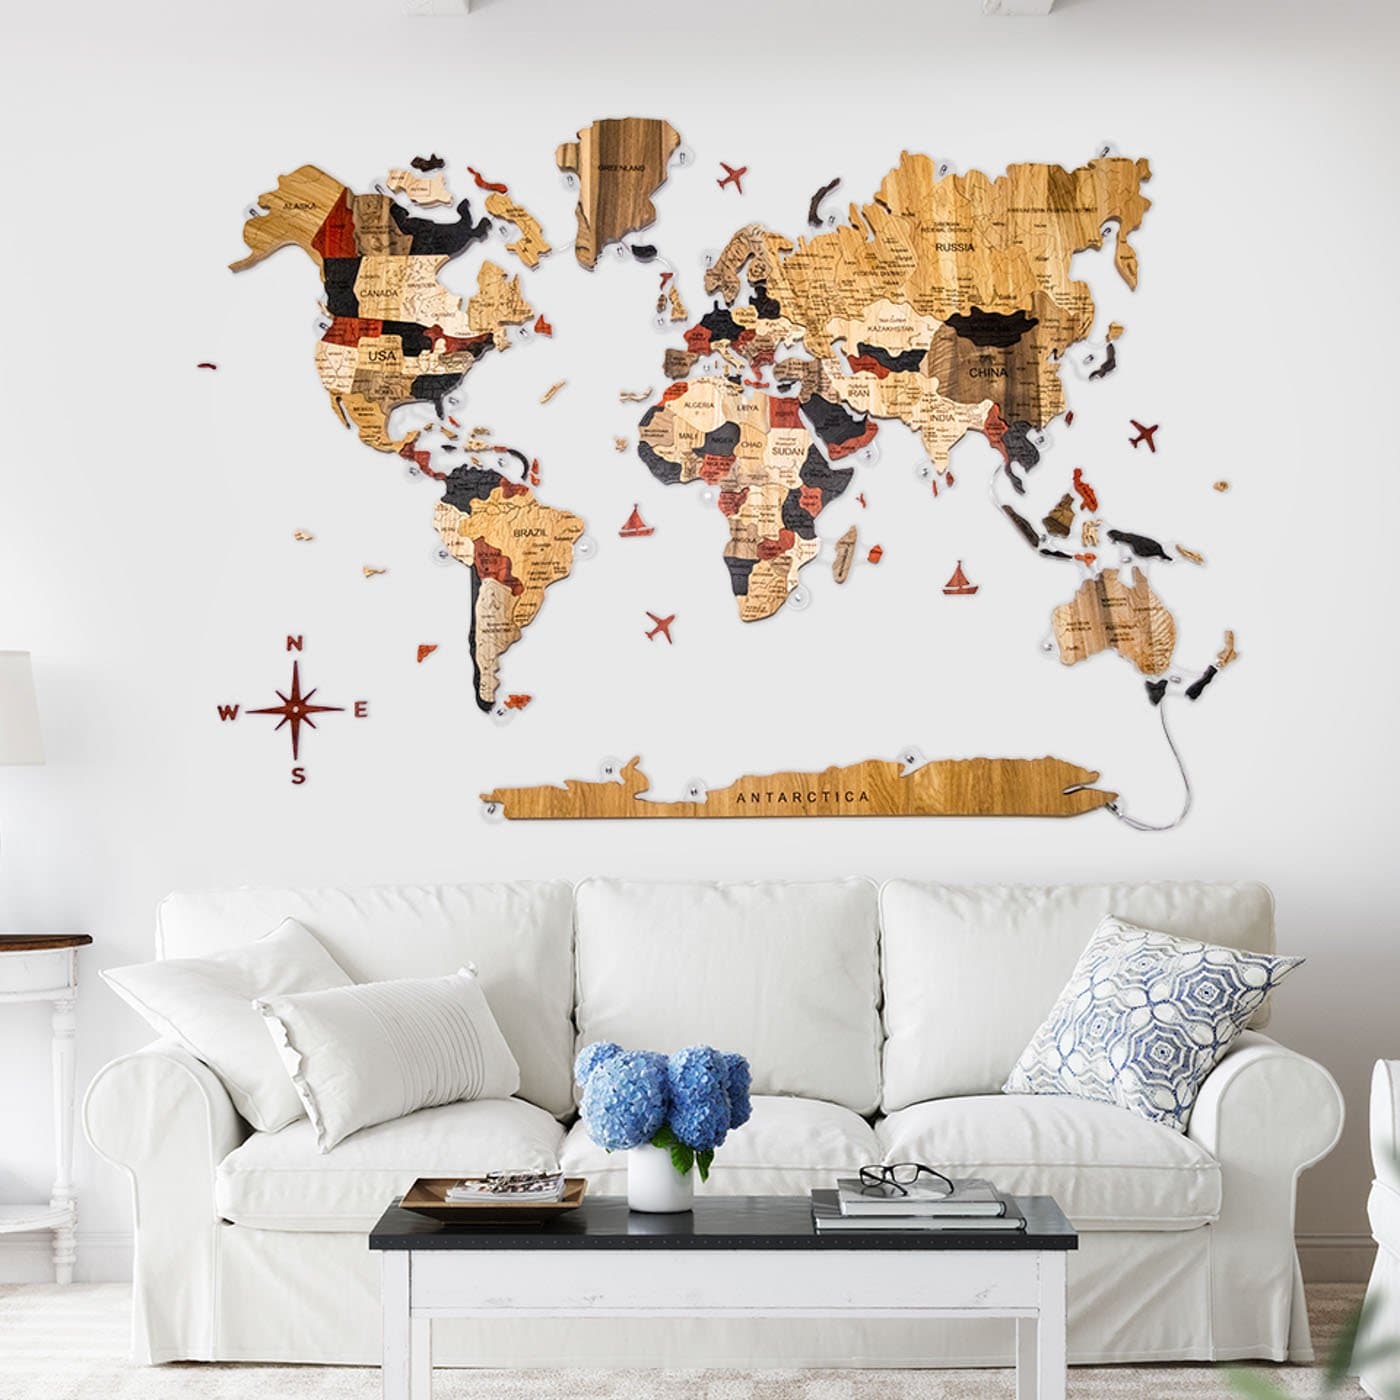 3D Wooden World Map Country from Enjoy The Wood ‣ Good Price, Reviews